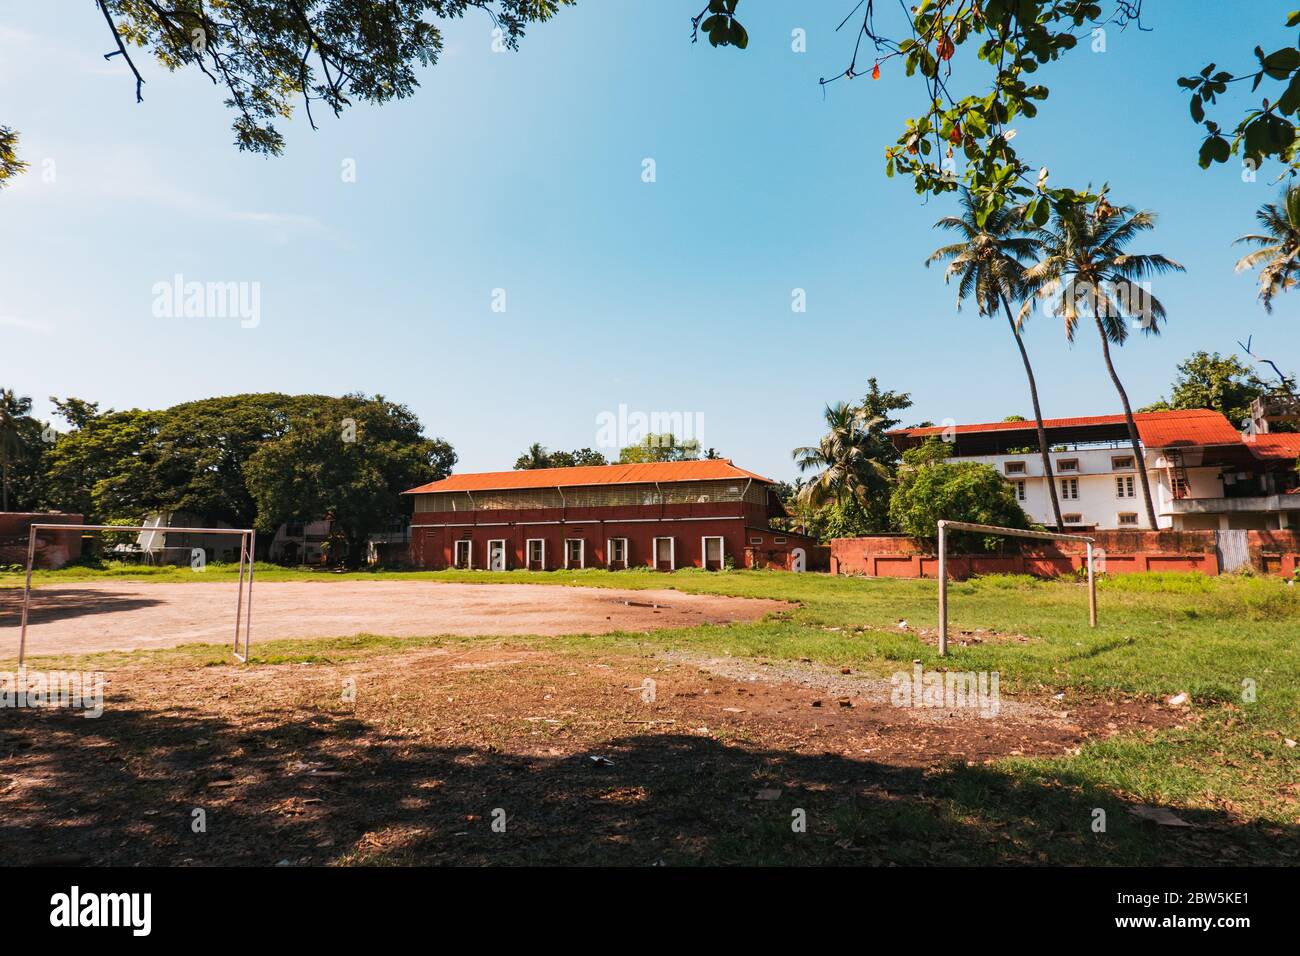 Soccer goal posts on a school grounds in Kochi, India Stock Photo